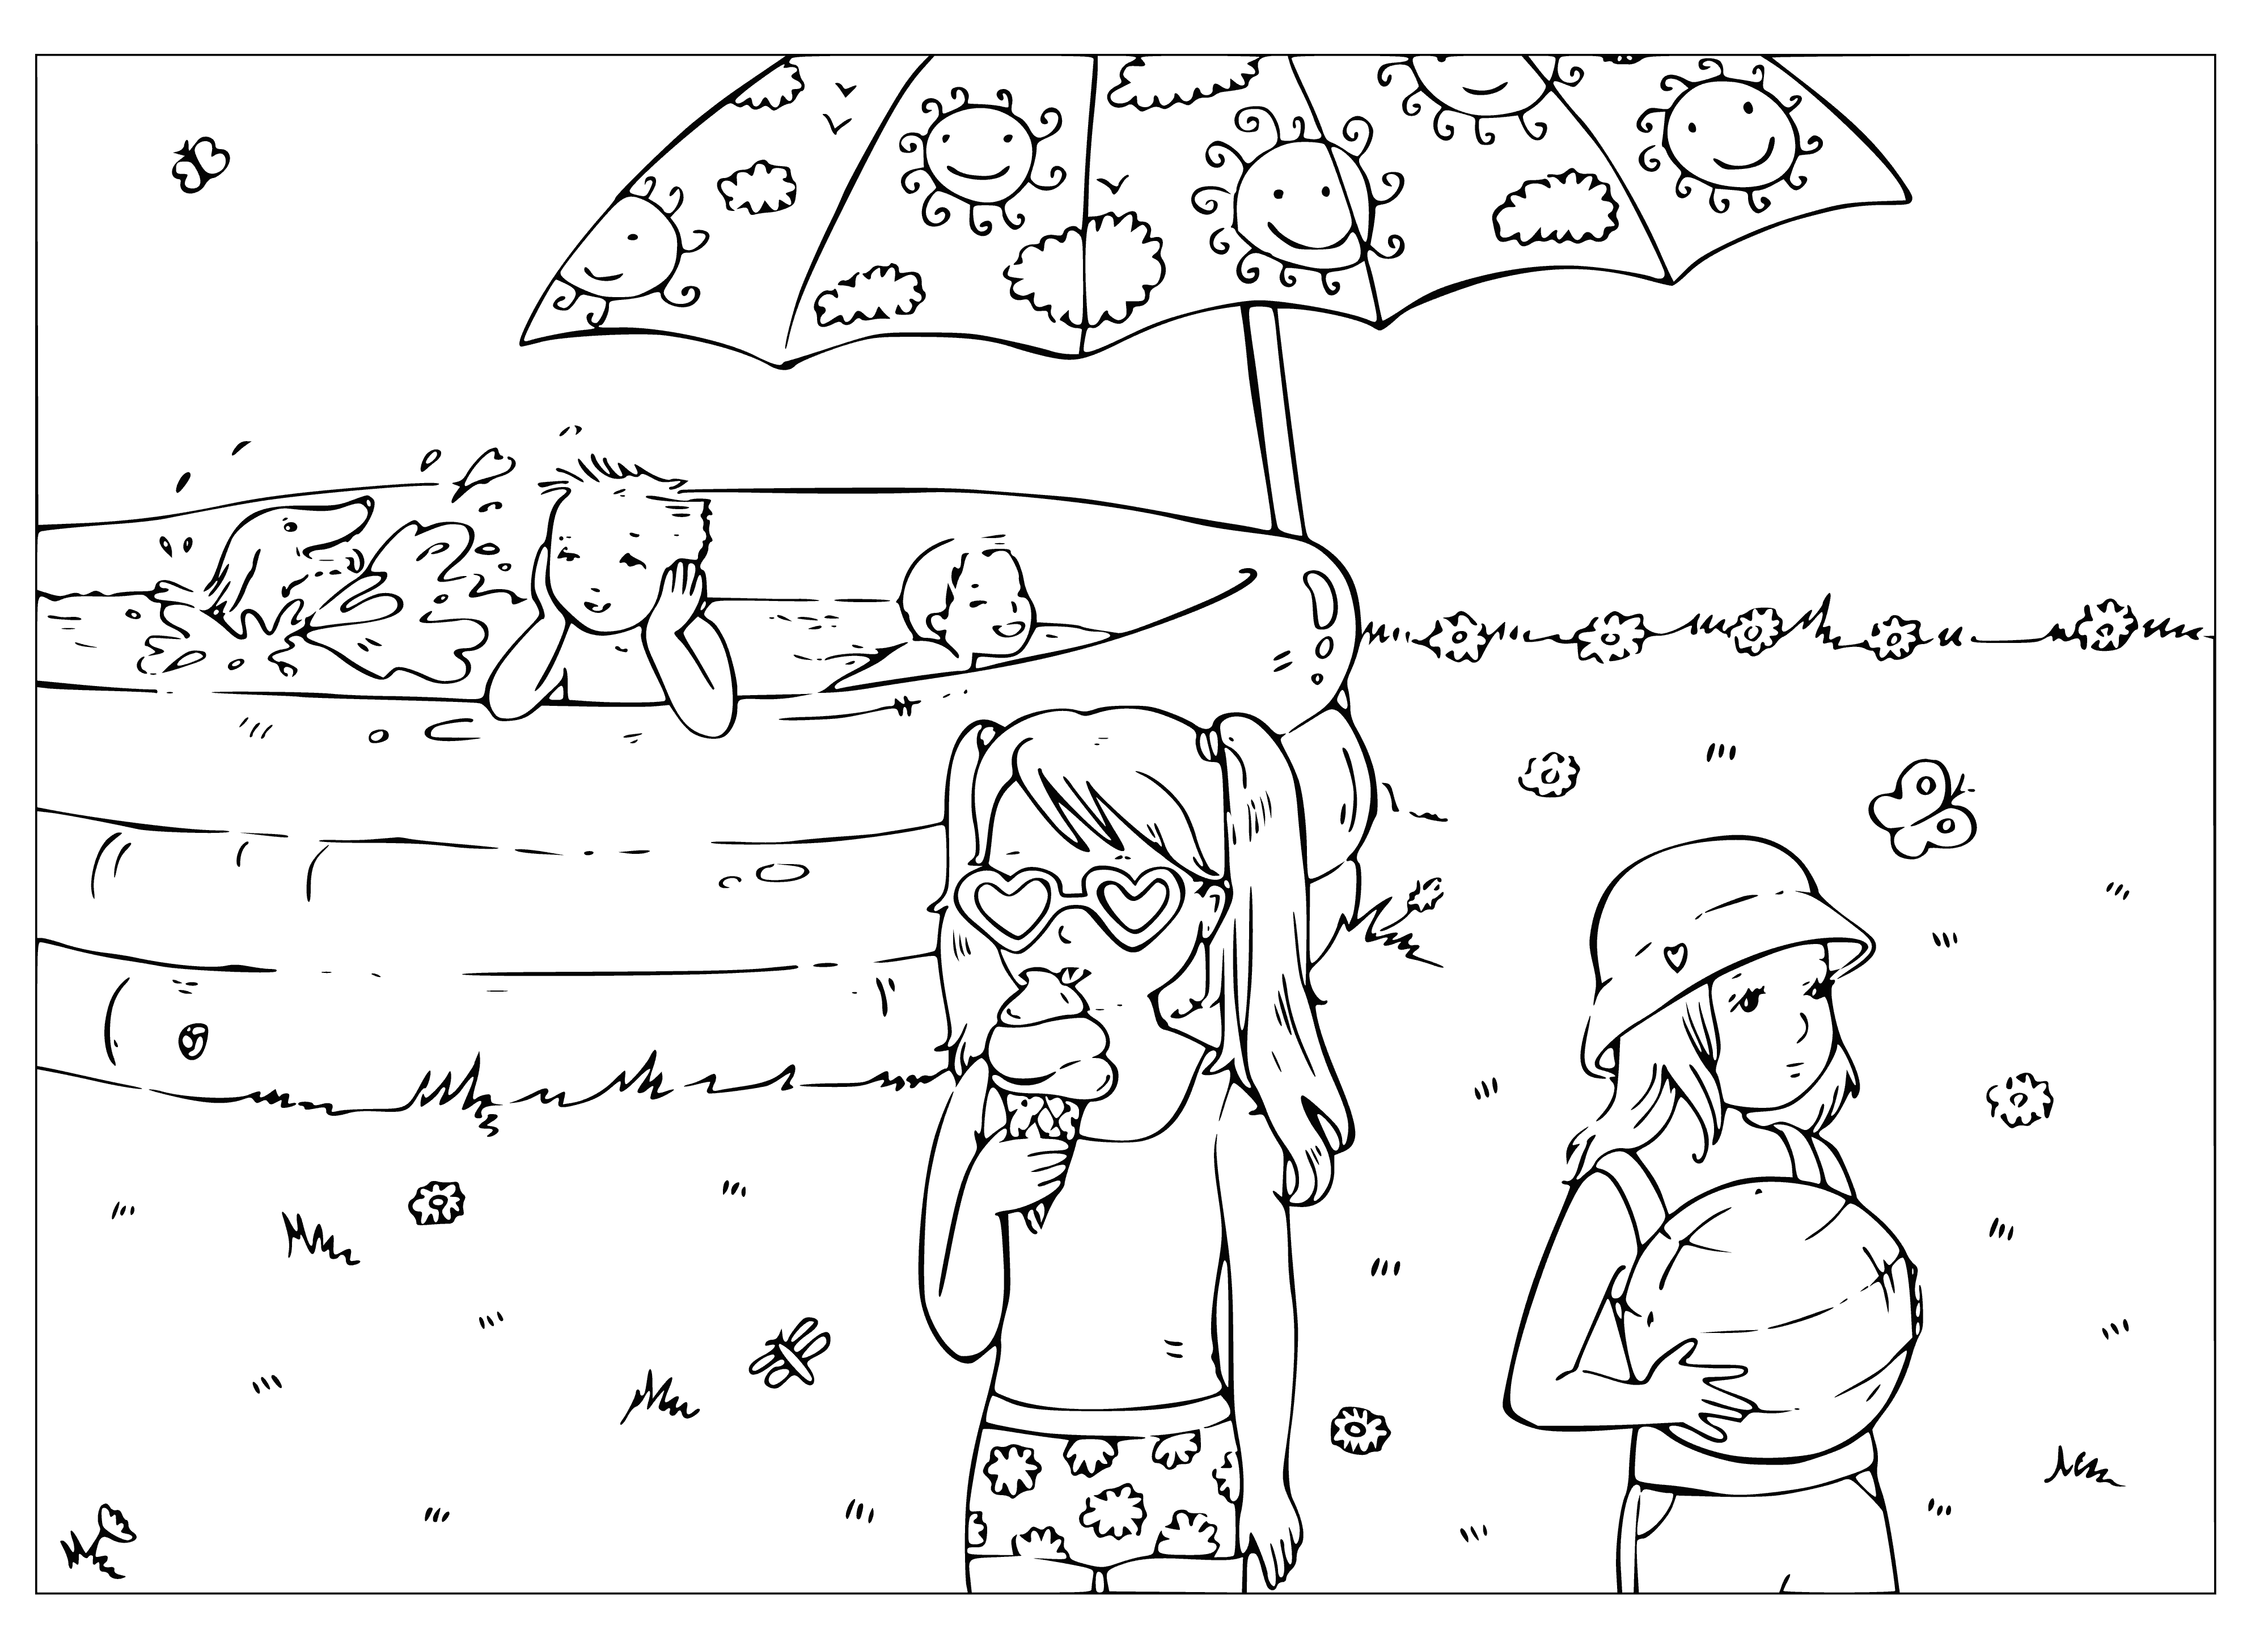 coloring page: Kids playing in water, having fun with their toys on a sunny day – what could be better? #SummerVibes